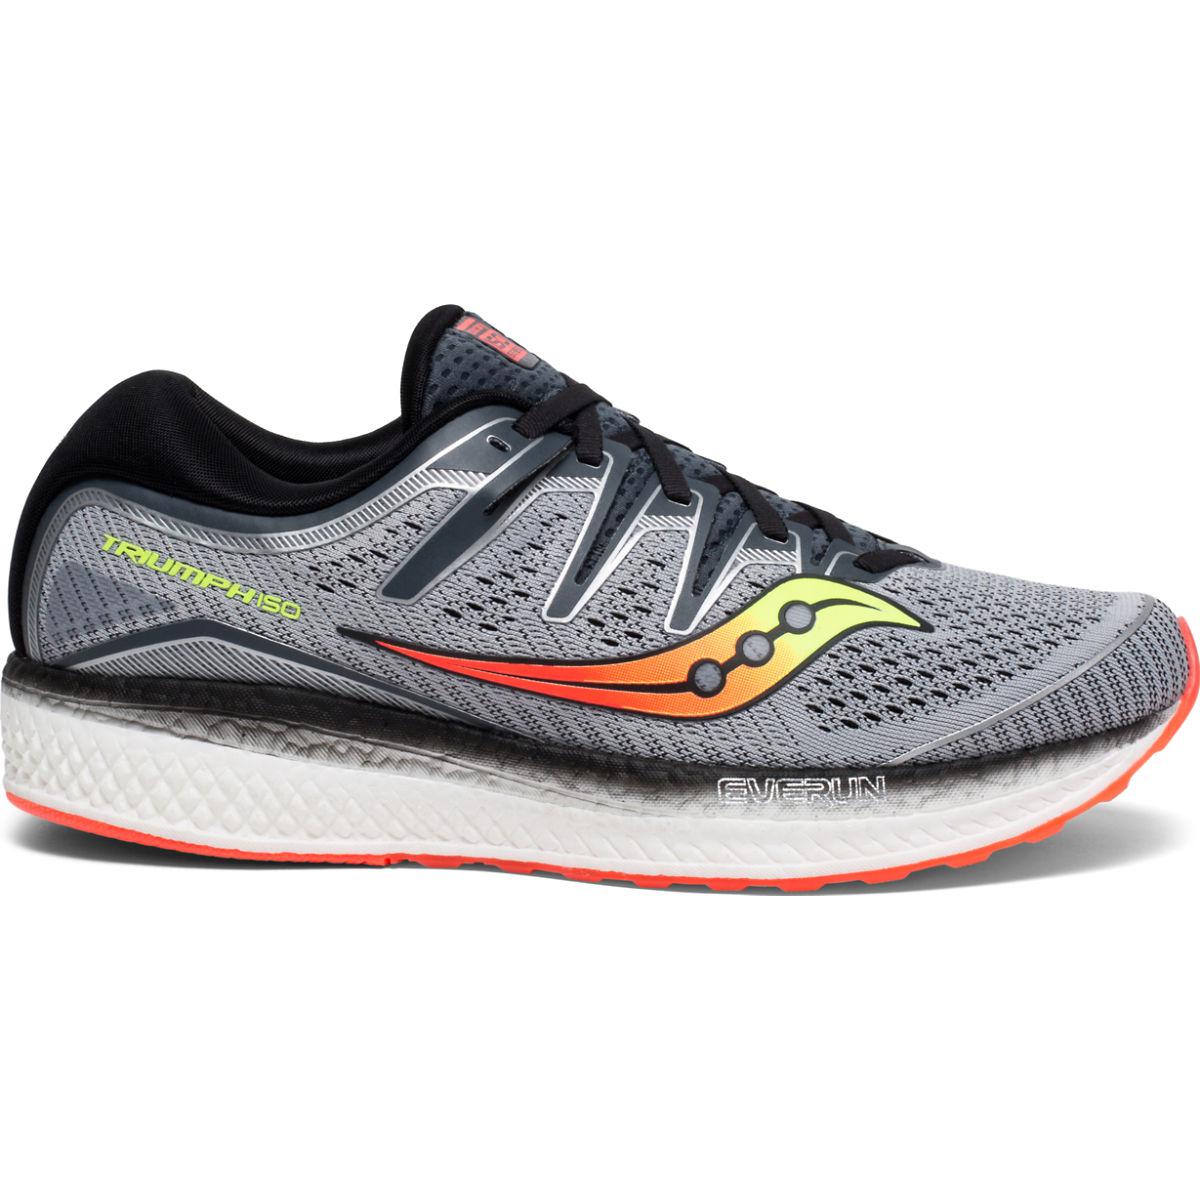 Saucony Synthetic Triumph Iso 5 in Grey | Black (Gray) for Men - Save ...